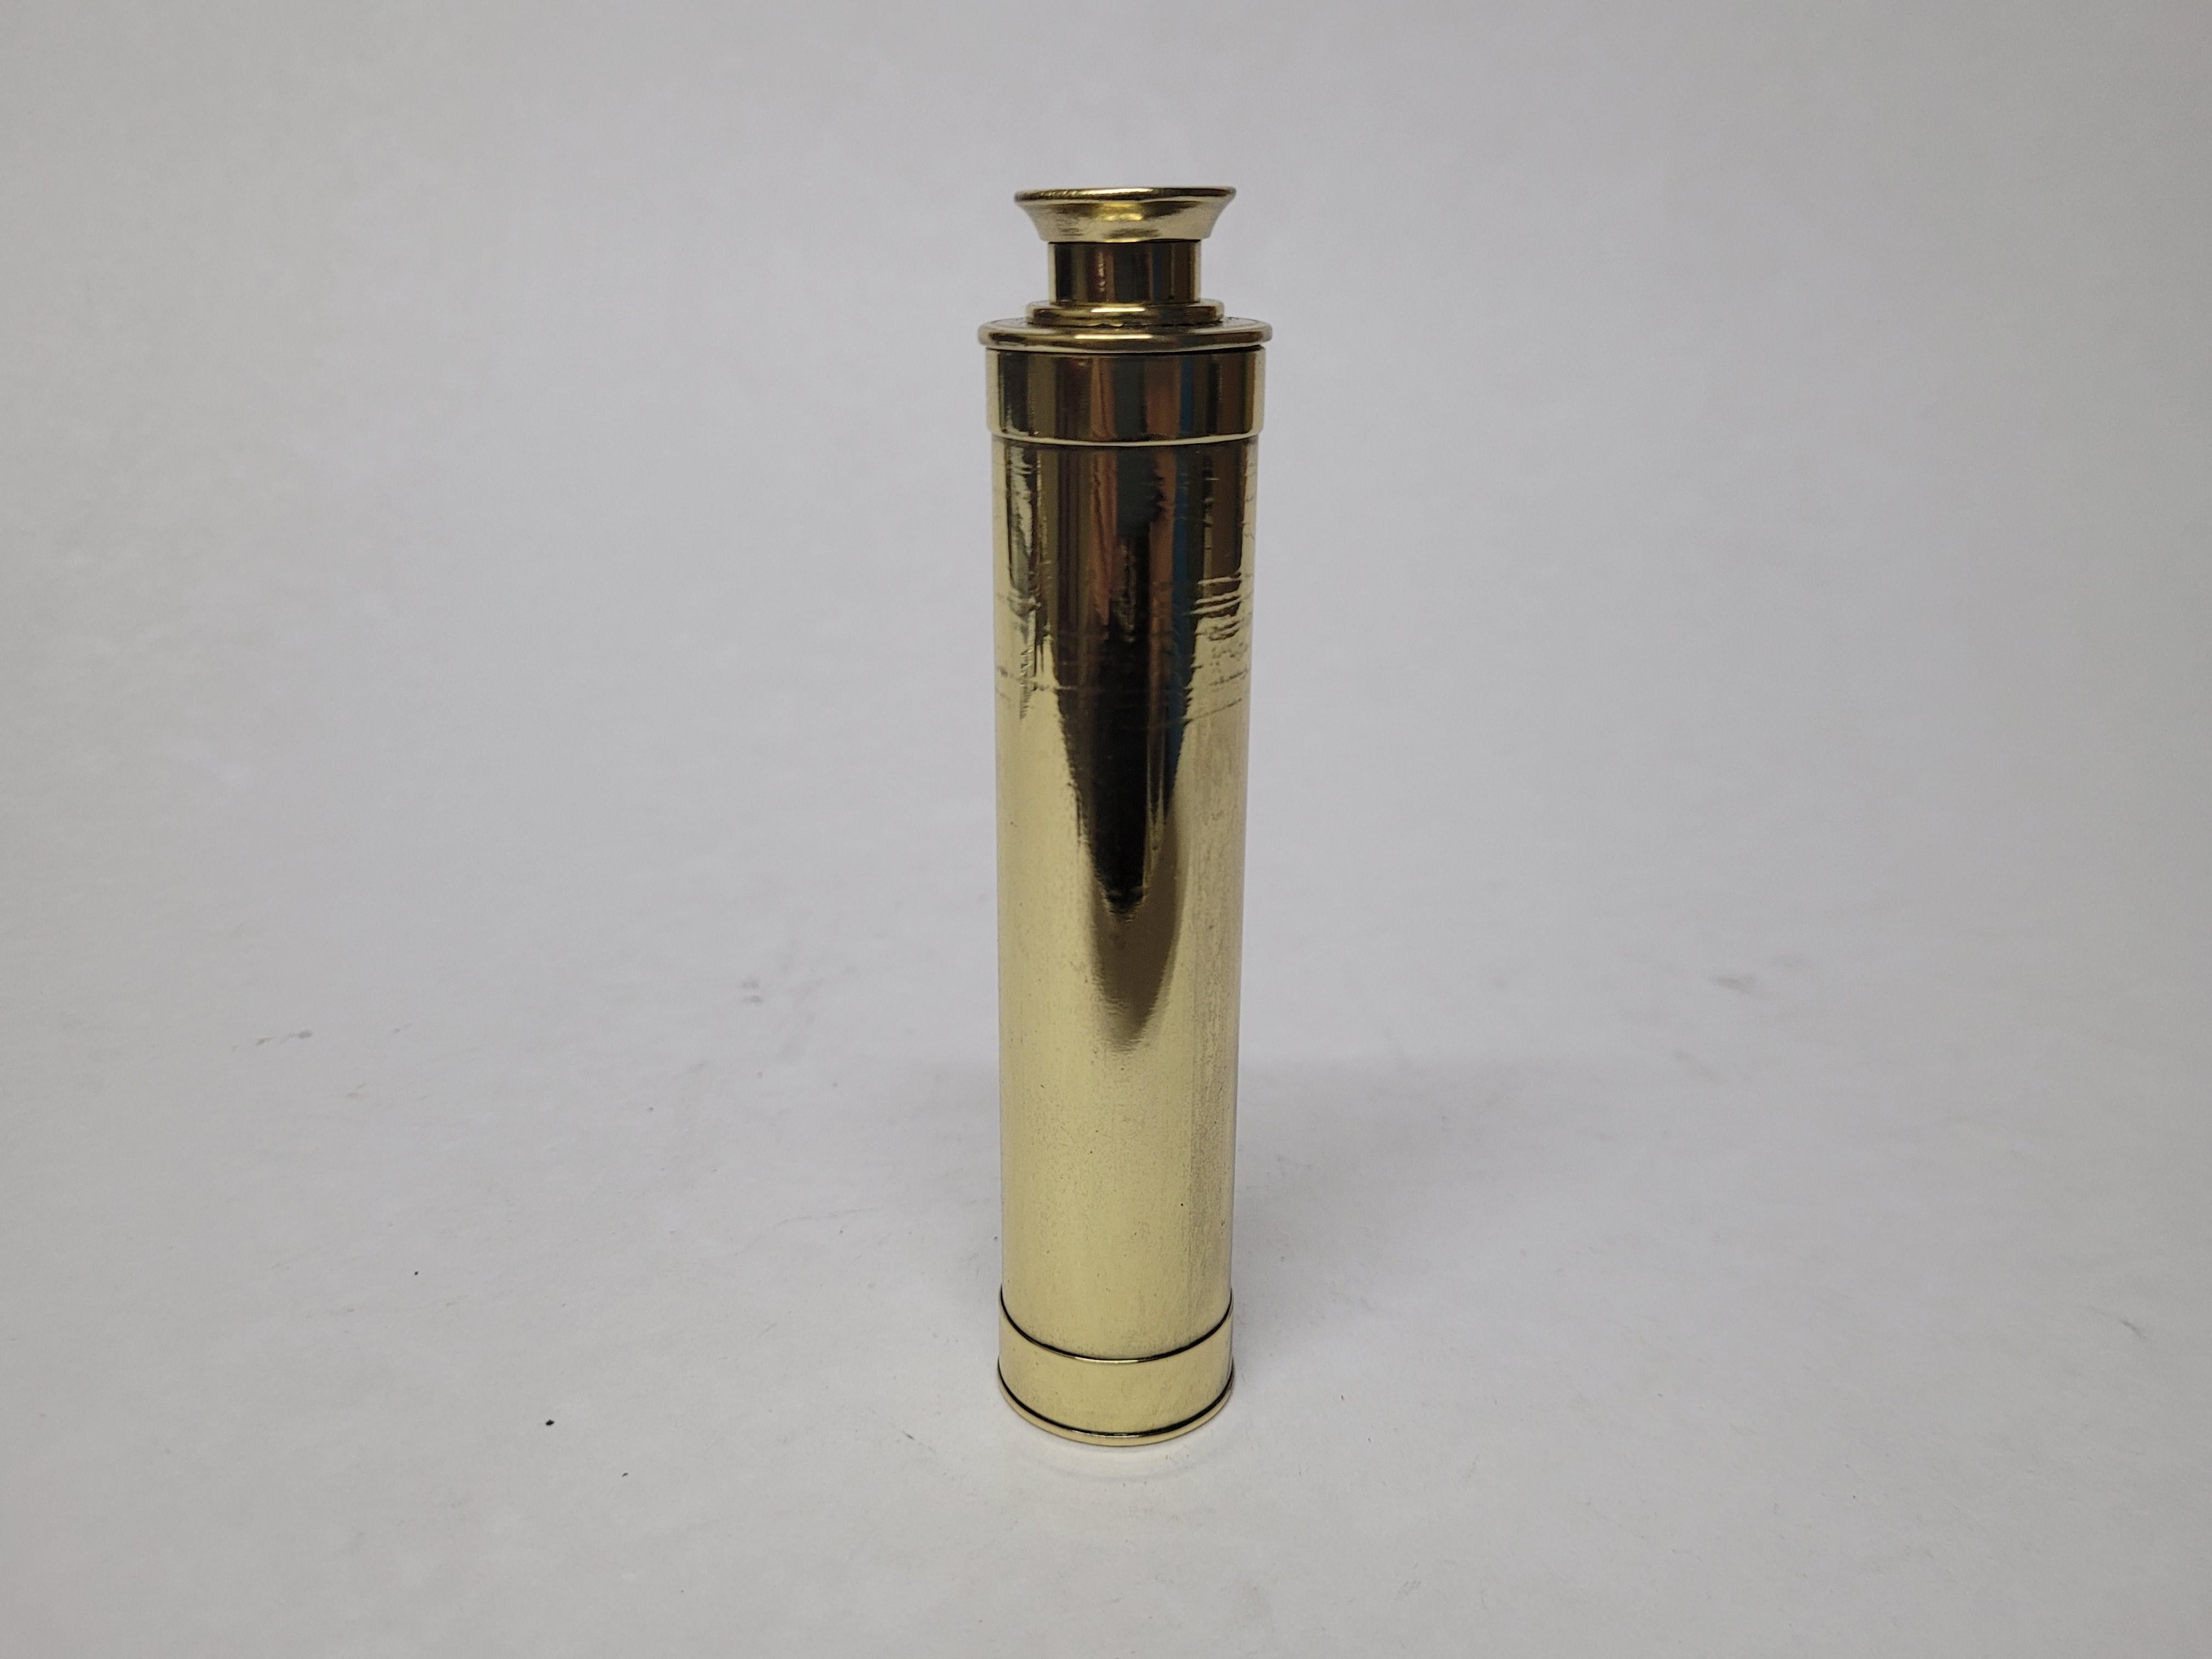 Tiny Ships spyglass telescope appropriate for use on a yacht, ship, or anywhere with a view. This has been meticulously polished and lacquered. We just restored a great collection of these. This fine instrument has a single draw barrel of solid